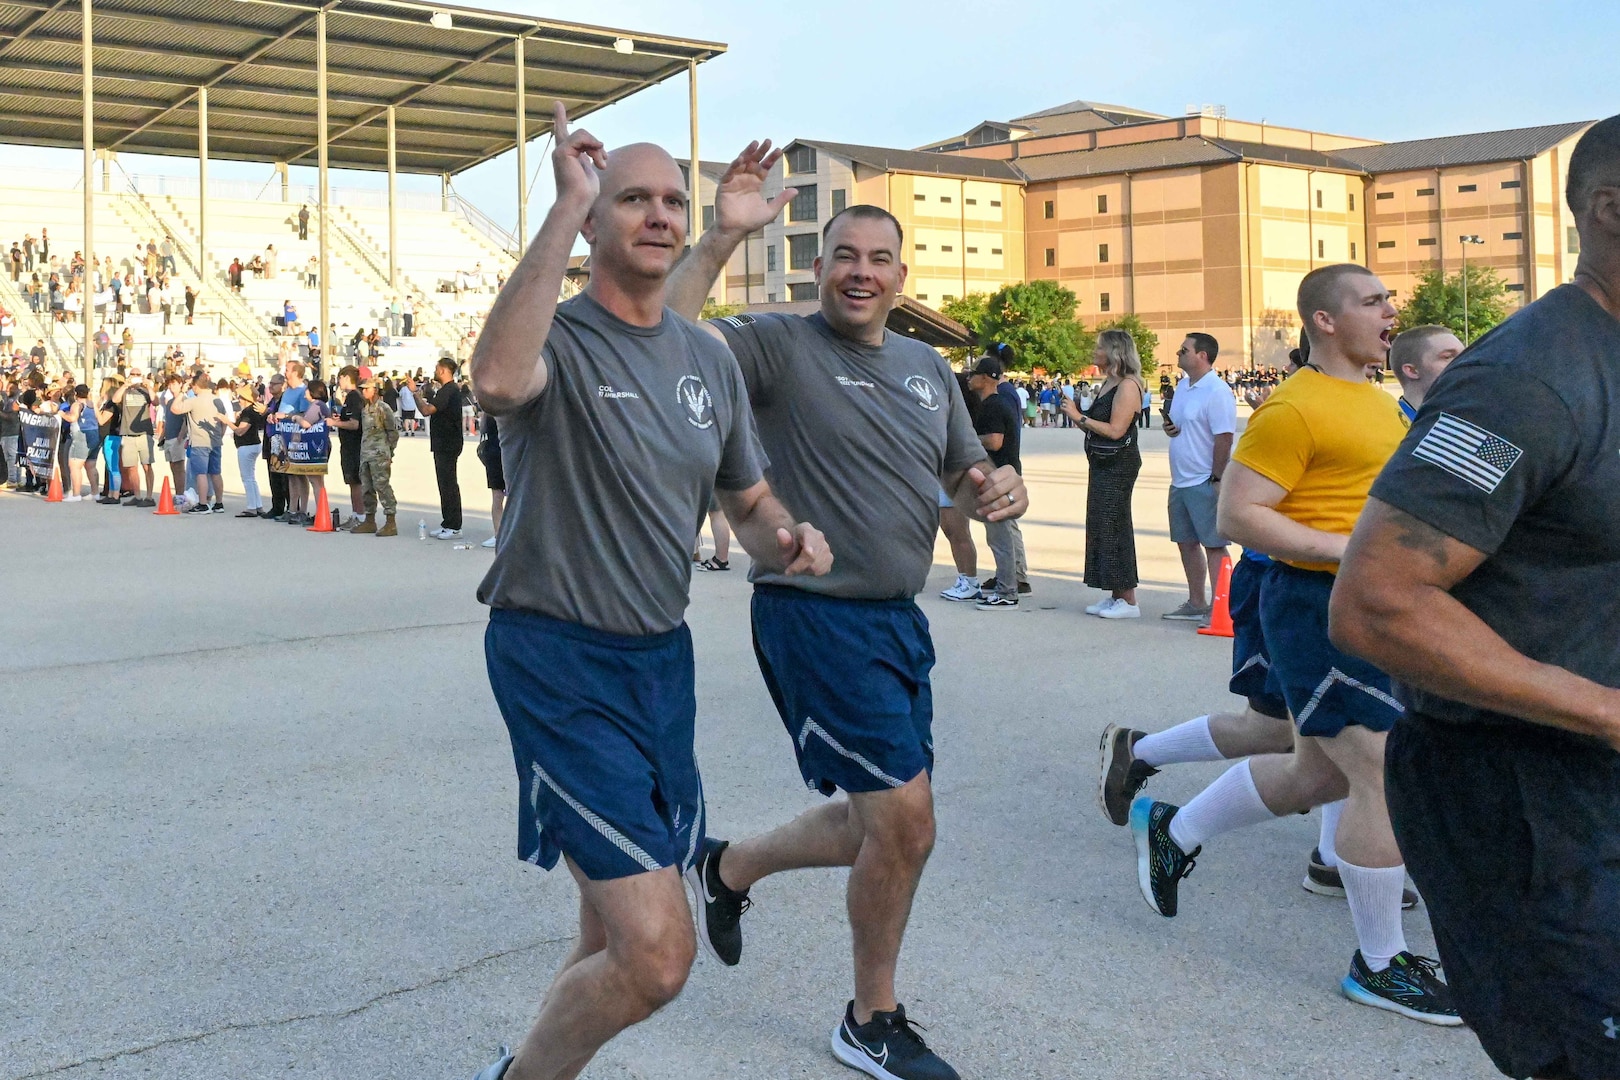 U.S. Air Force Col. Jeff Marshall, 97th Air Mobility Wing (AMW) commander, and Chief Master Sgt. Justin Brundage, 97th AMW command chief, join the 321st Training Squadron for the Airman’s Run during a Basic Military Training (BMT) graduation at Joint Base San Antonio-Lackland, Texas, May 15, 2024. The one-and-a-half mile run is the first opportunity for graduating Airmen to see their loved ones after leaving for BMT seven-and-a-half weeks prior. (U.S. Air Force photo by Senior Airman Kari Degraffenreed)